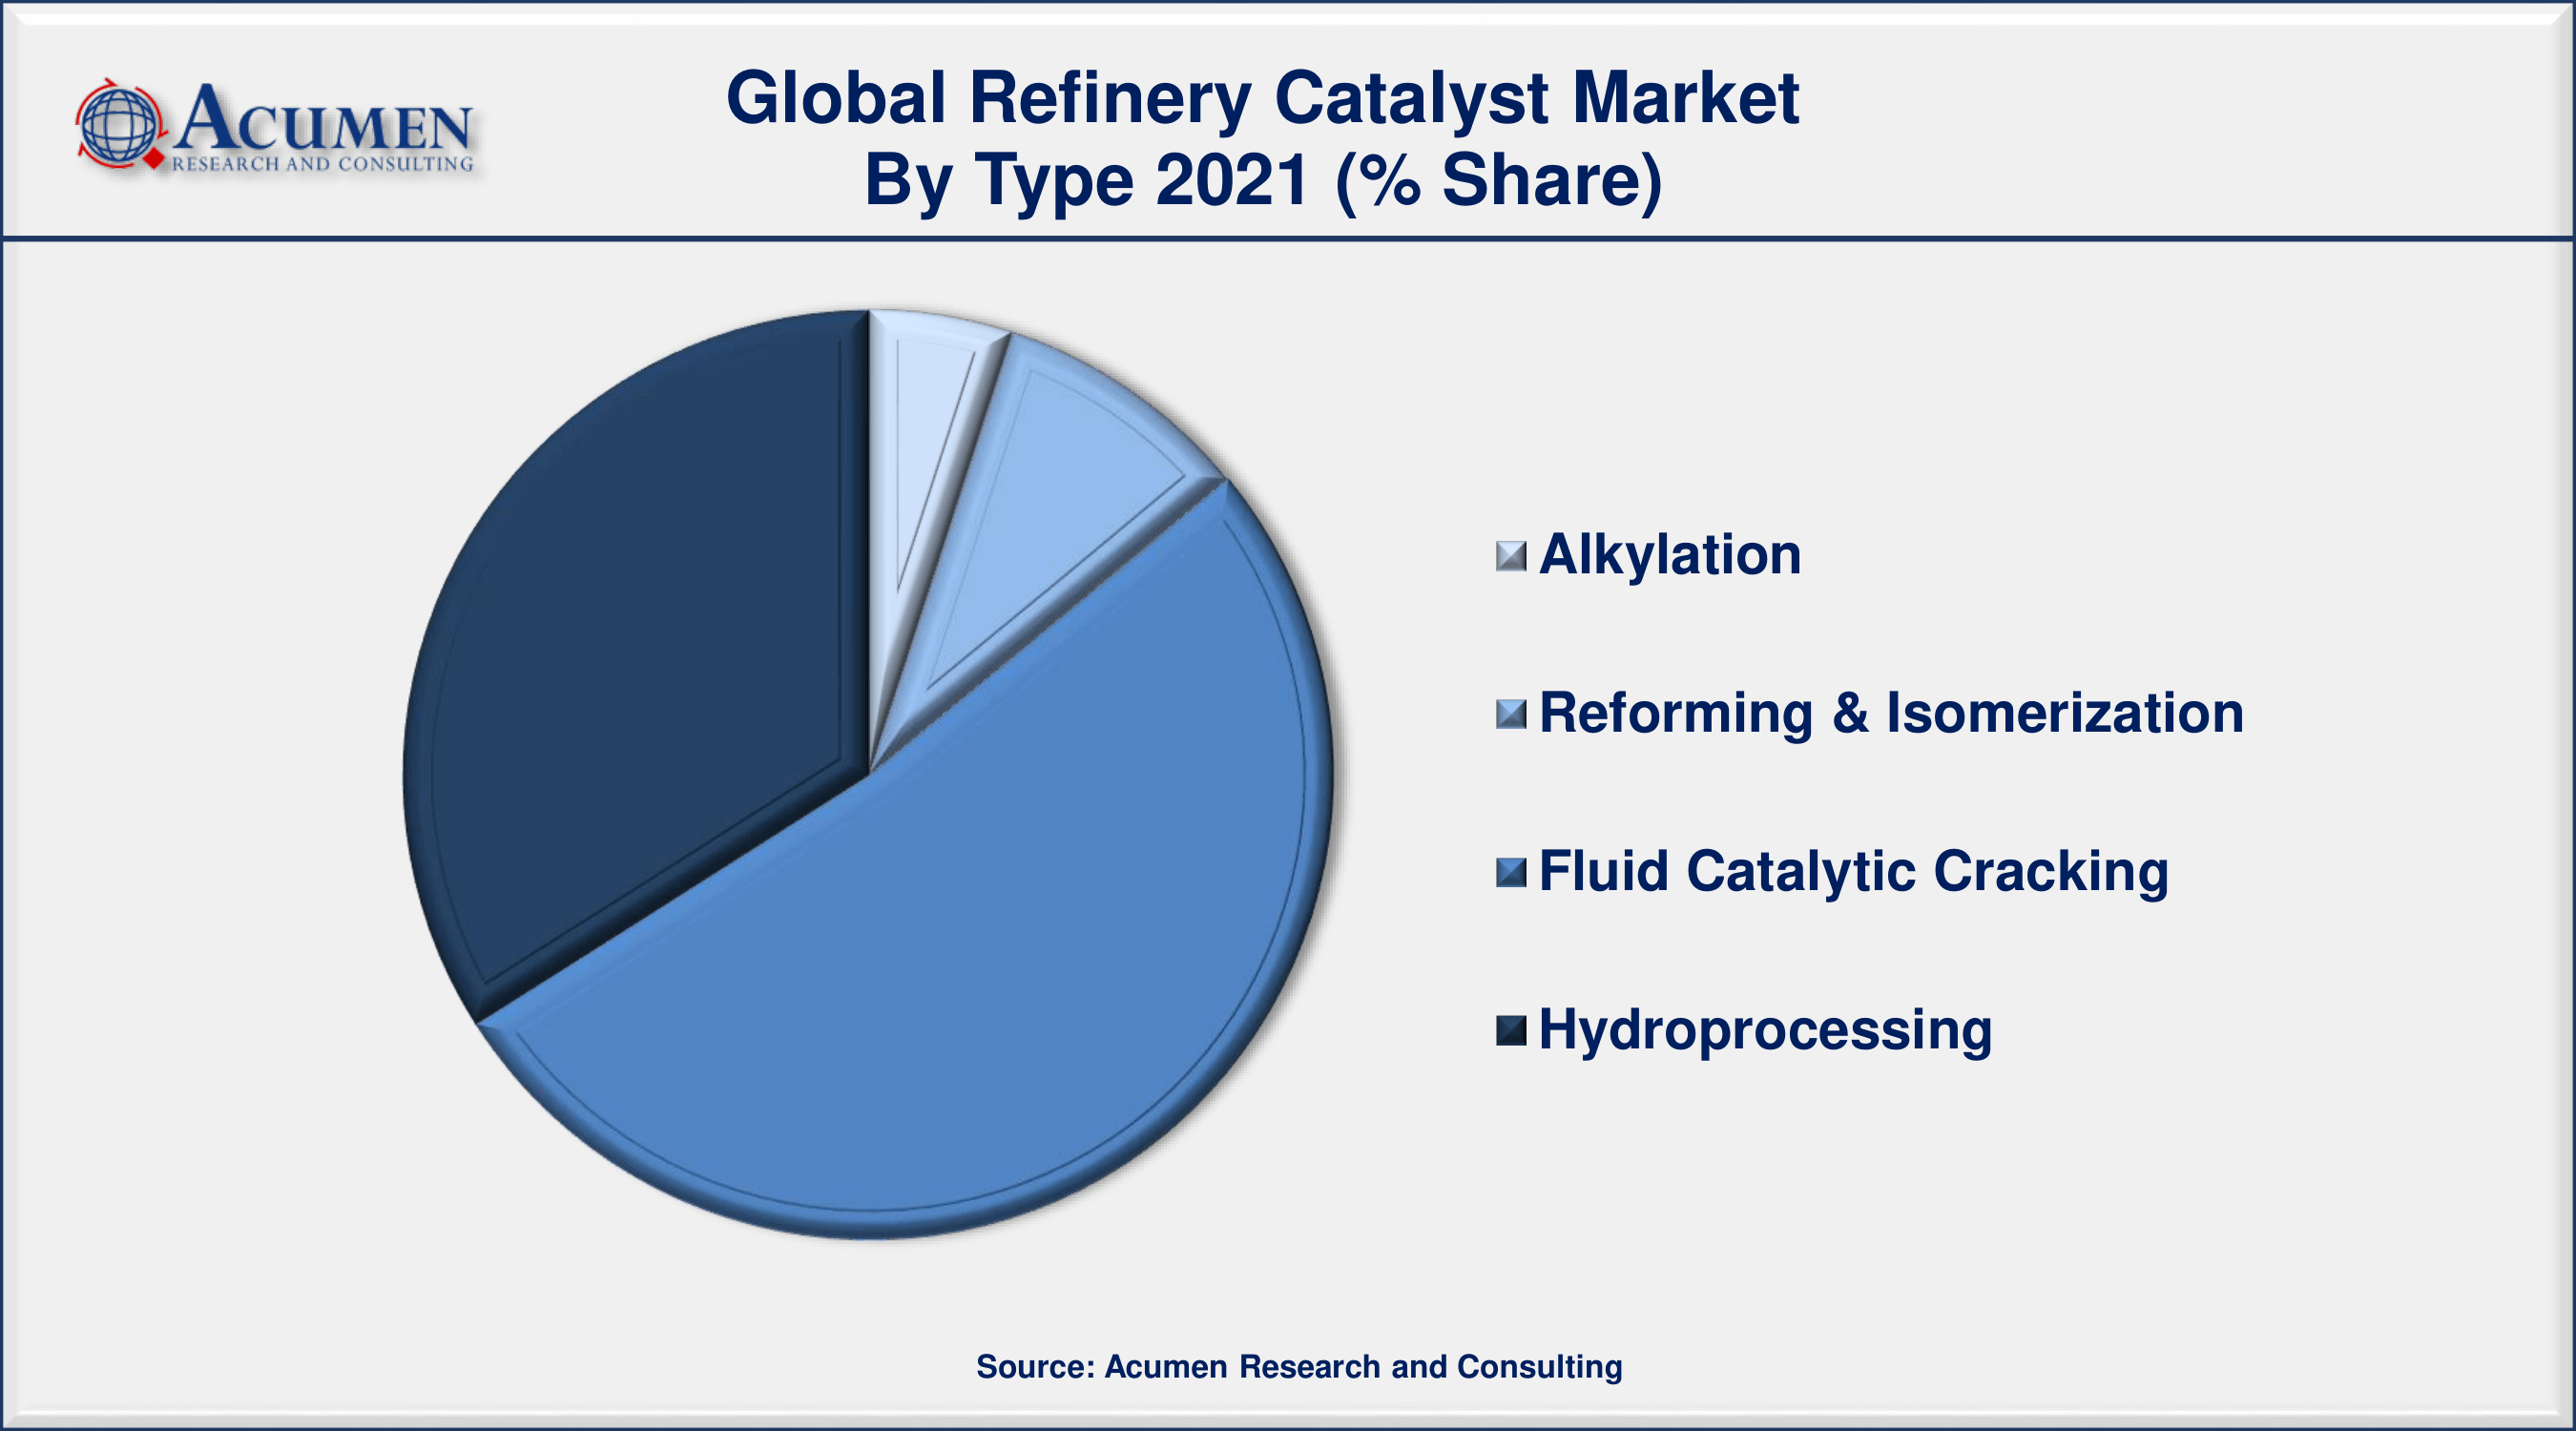 In terms of type, the market share for fluid catalytic cracking will surpass 50% in 2021